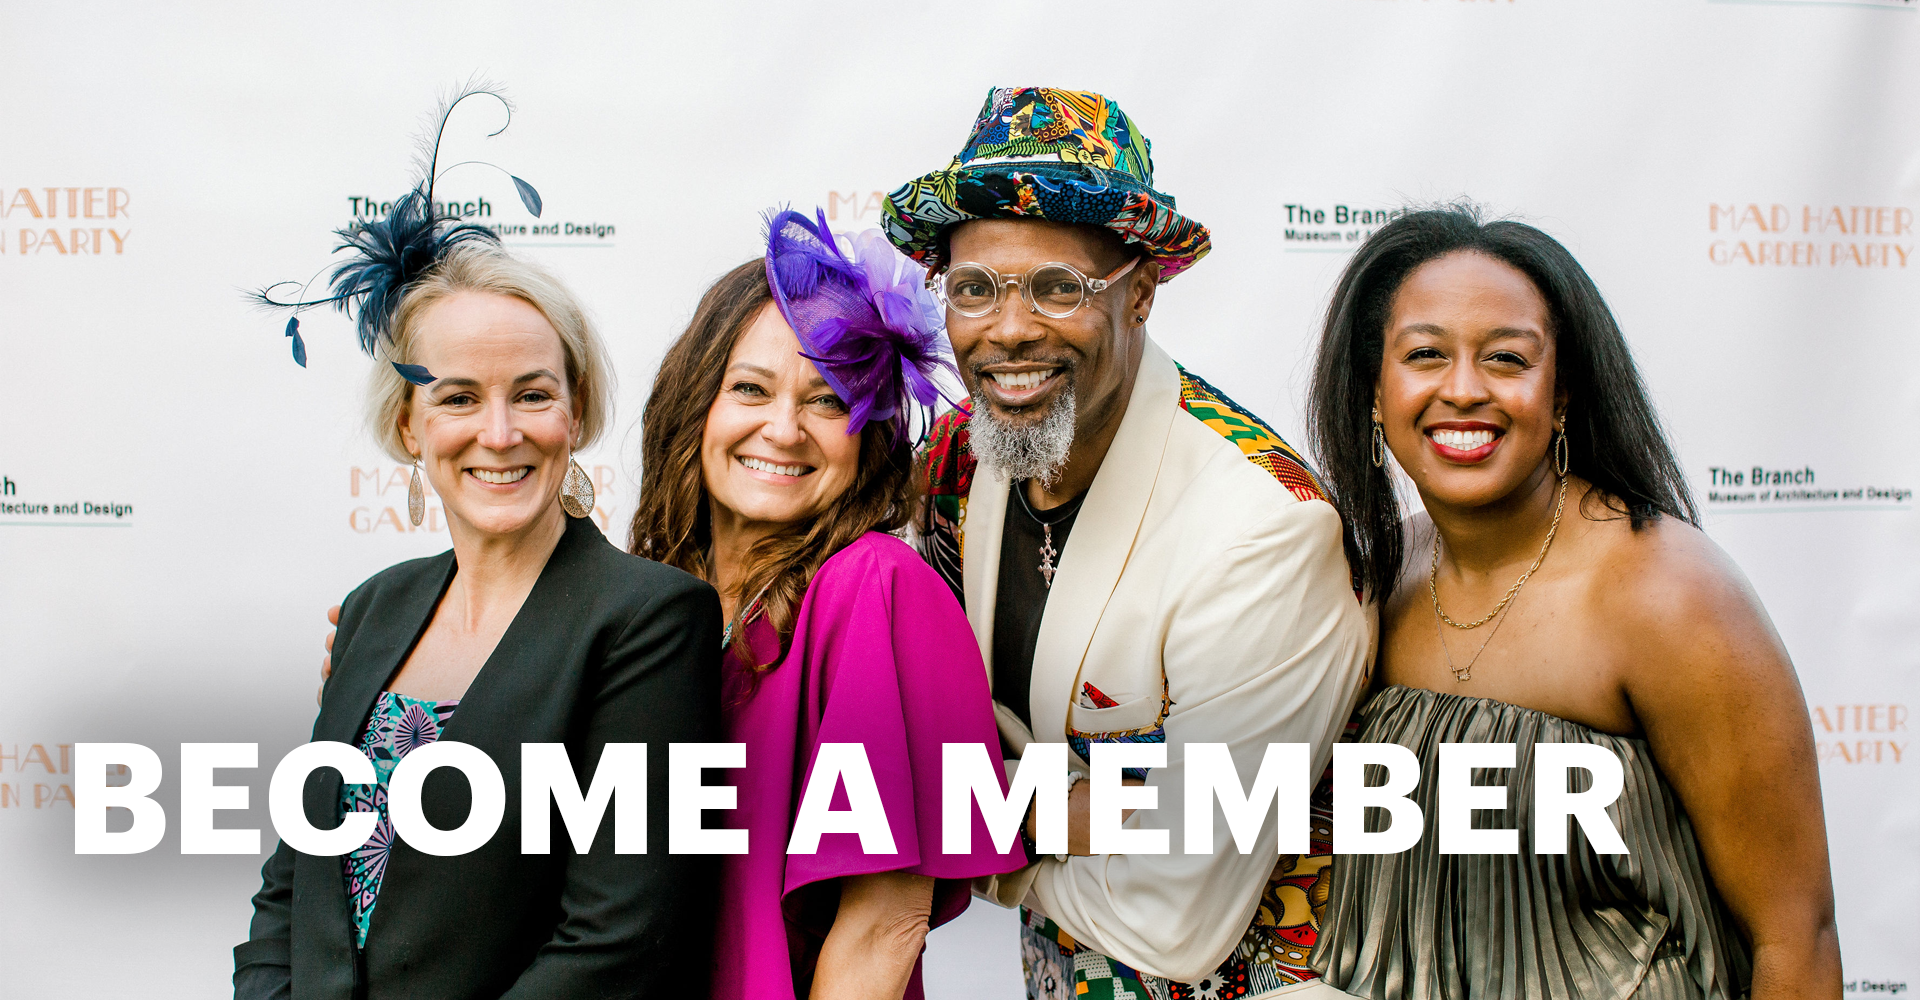 Four people standing together smiling at the camera with the words "Become a Member"